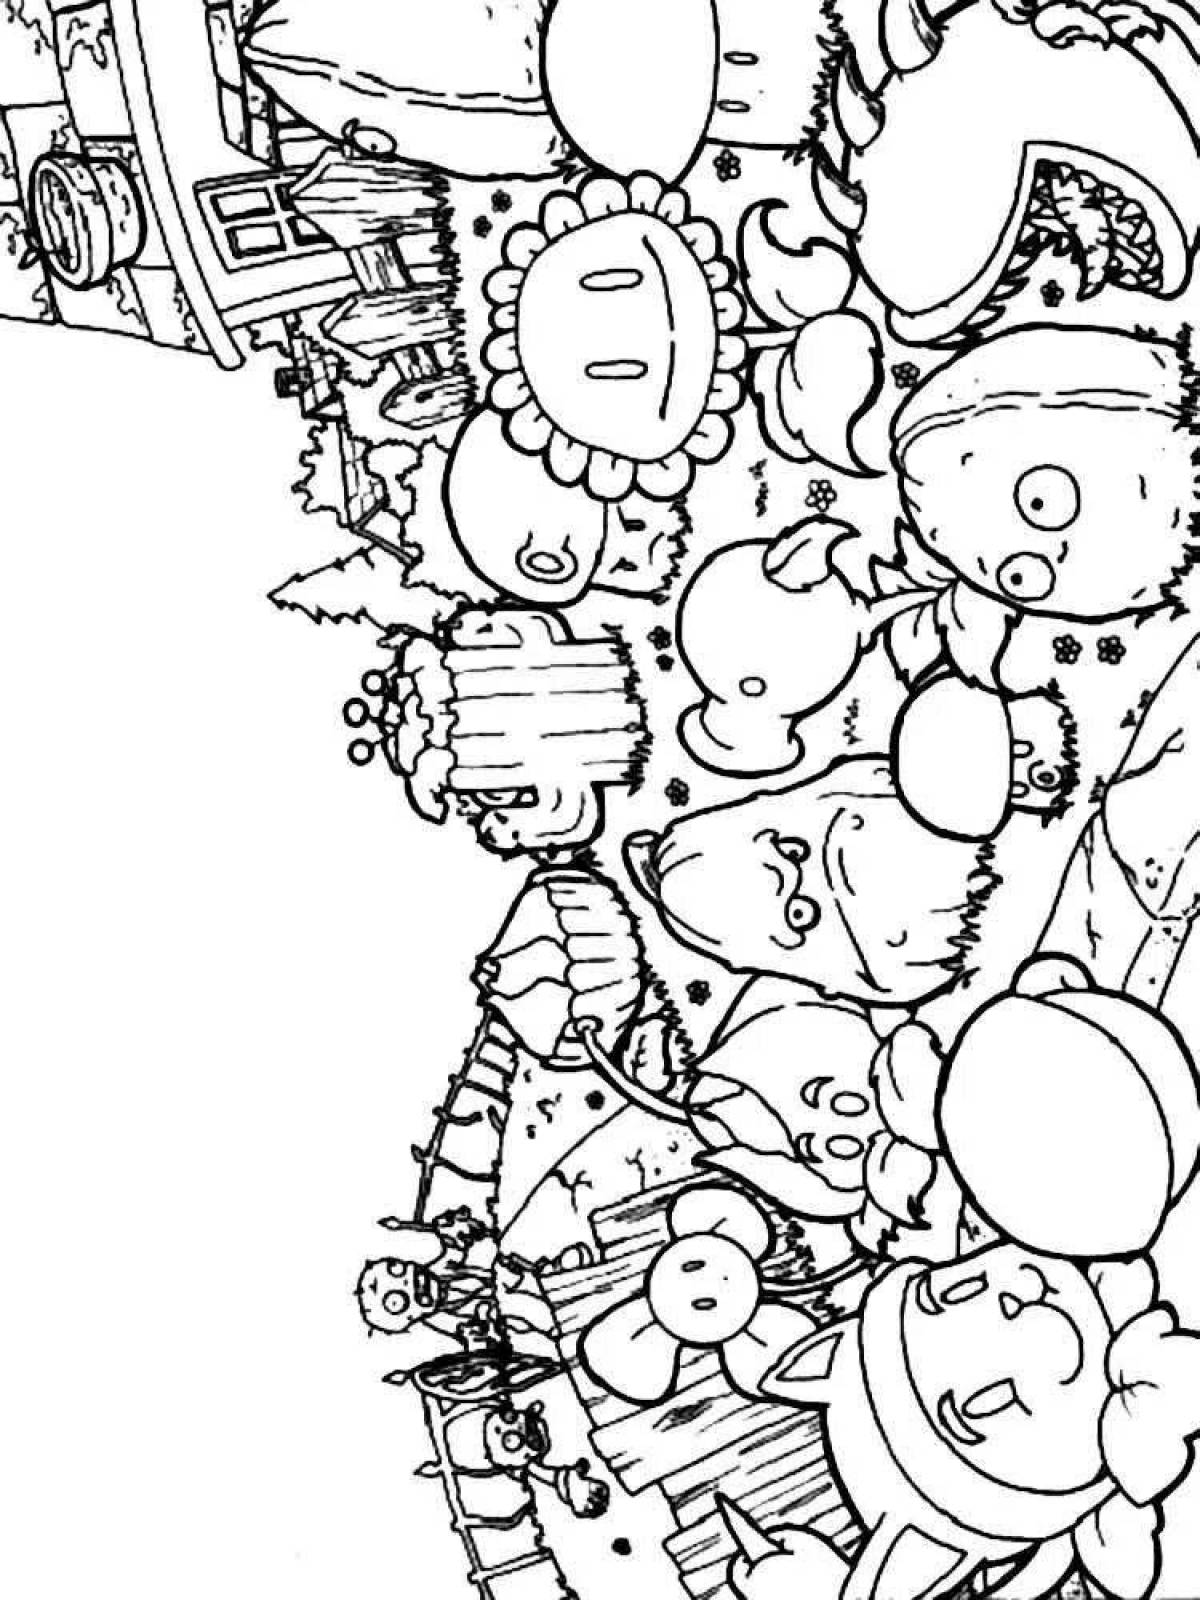 Earth zombie coloring book